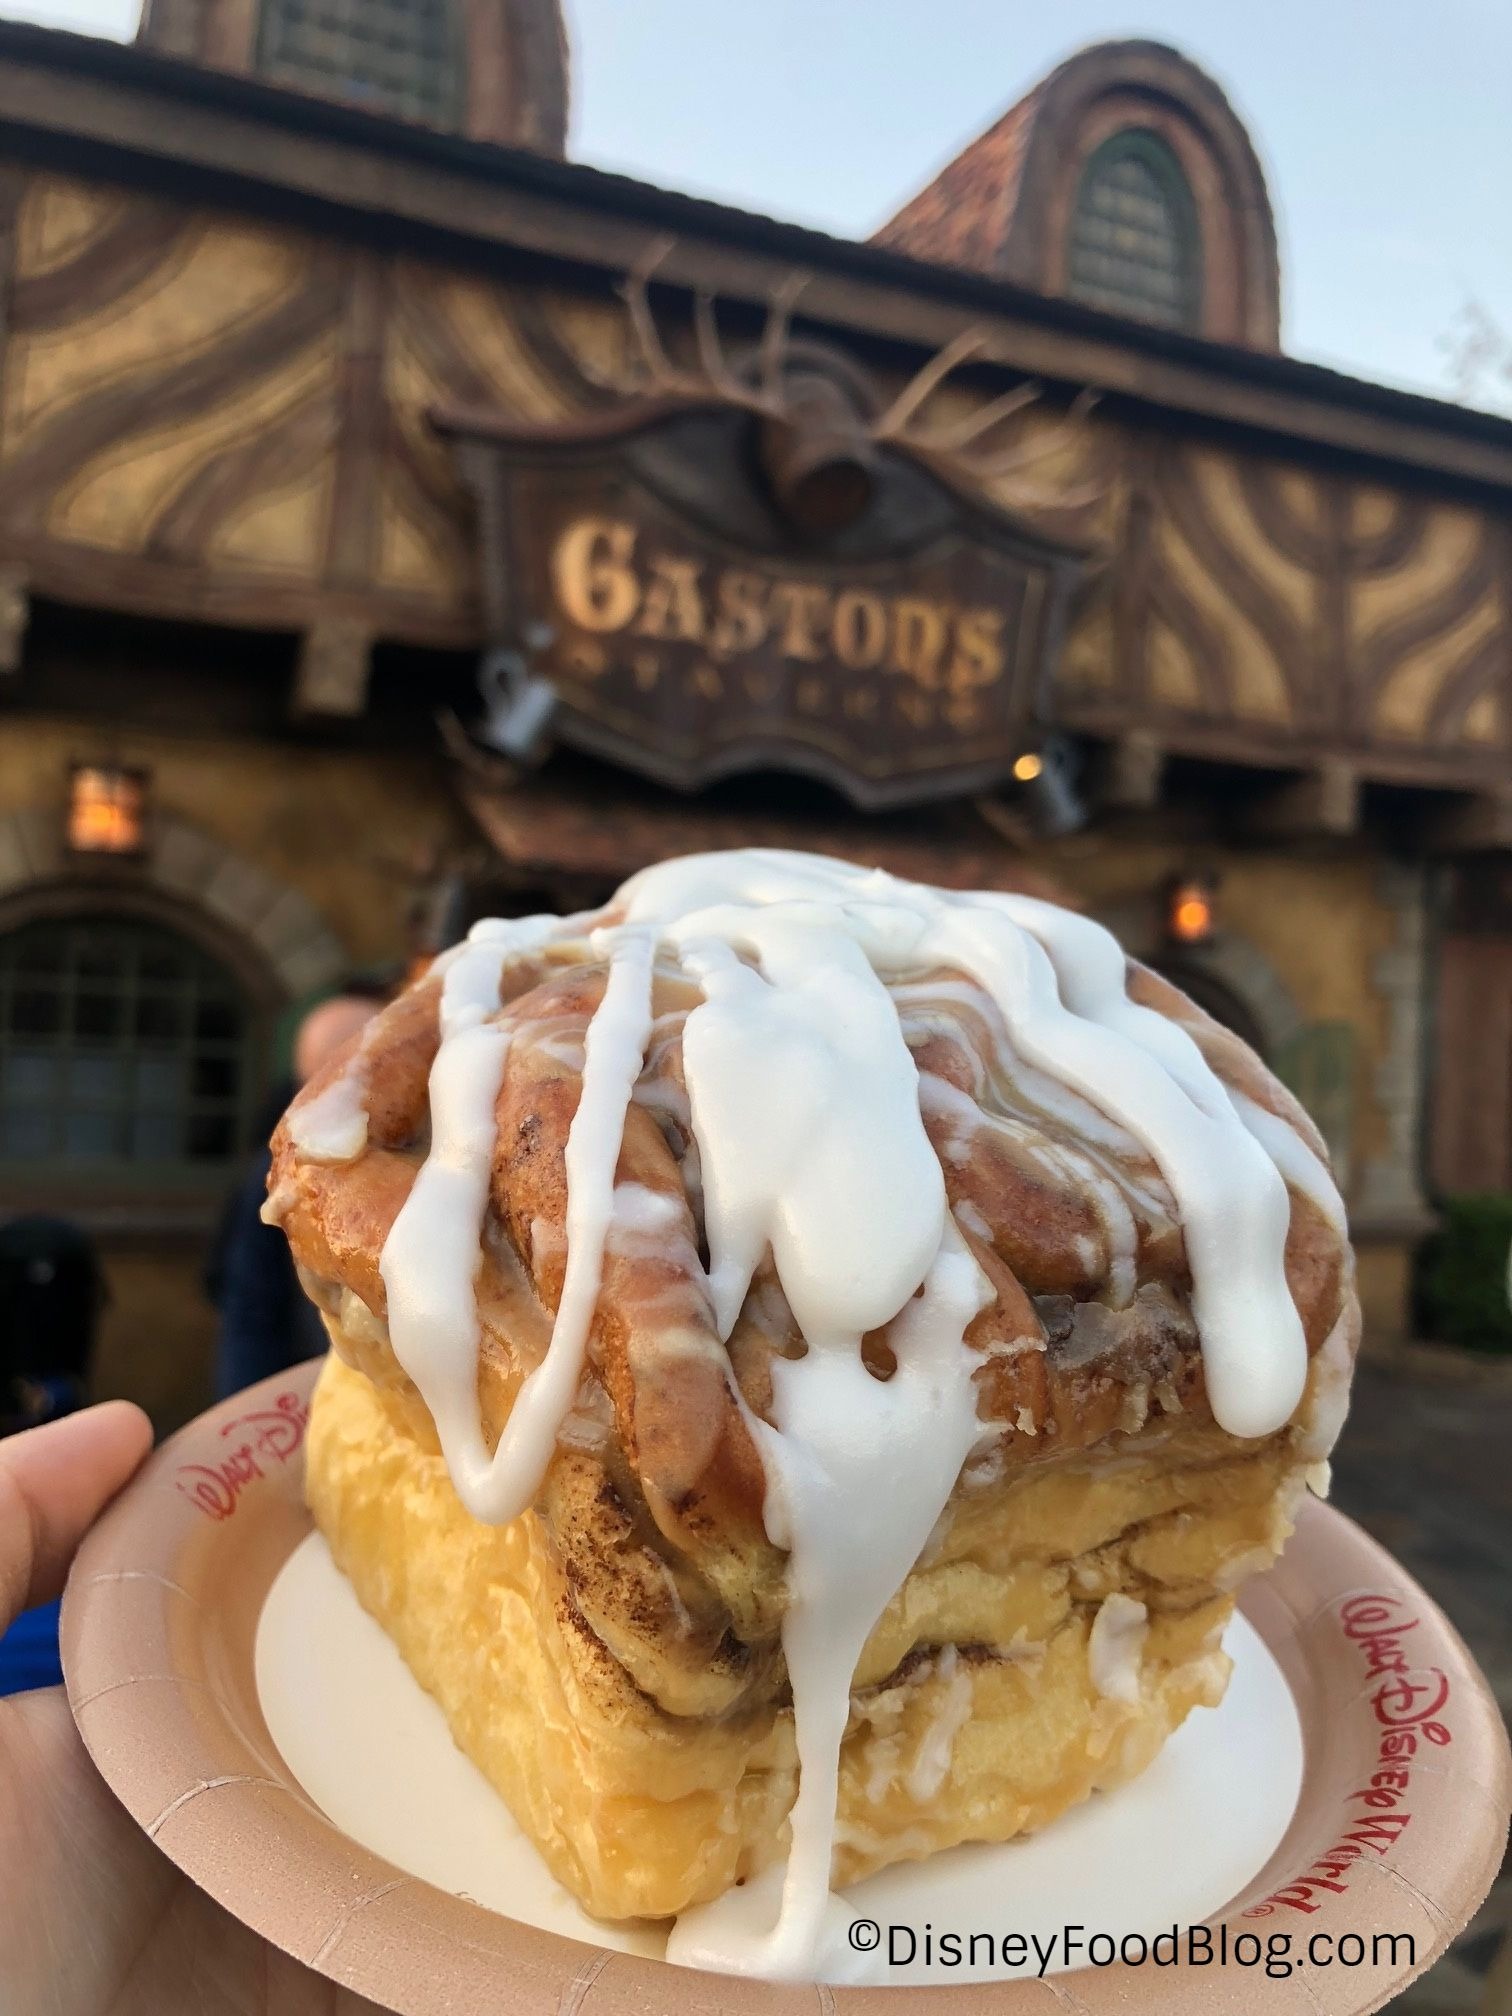 gastons-tavern-cinnamon-roll-with-icing.